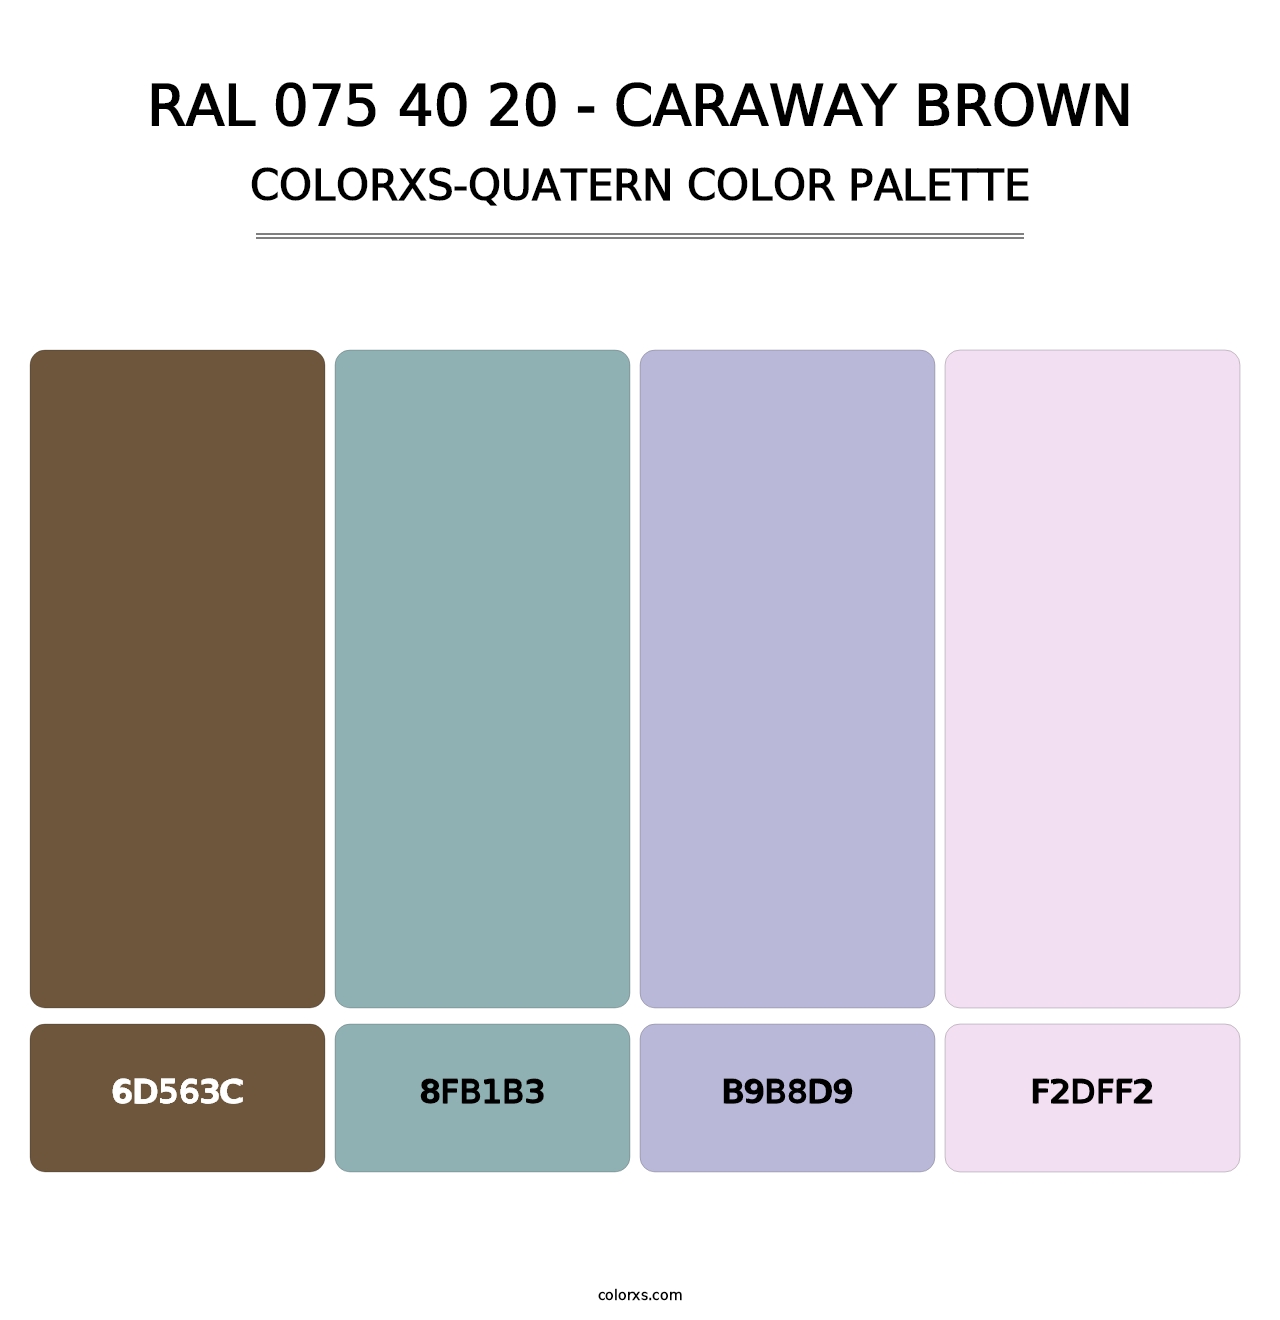 RAL 075 40 20 - Caraway Brown - Colorxs Quatern Palette